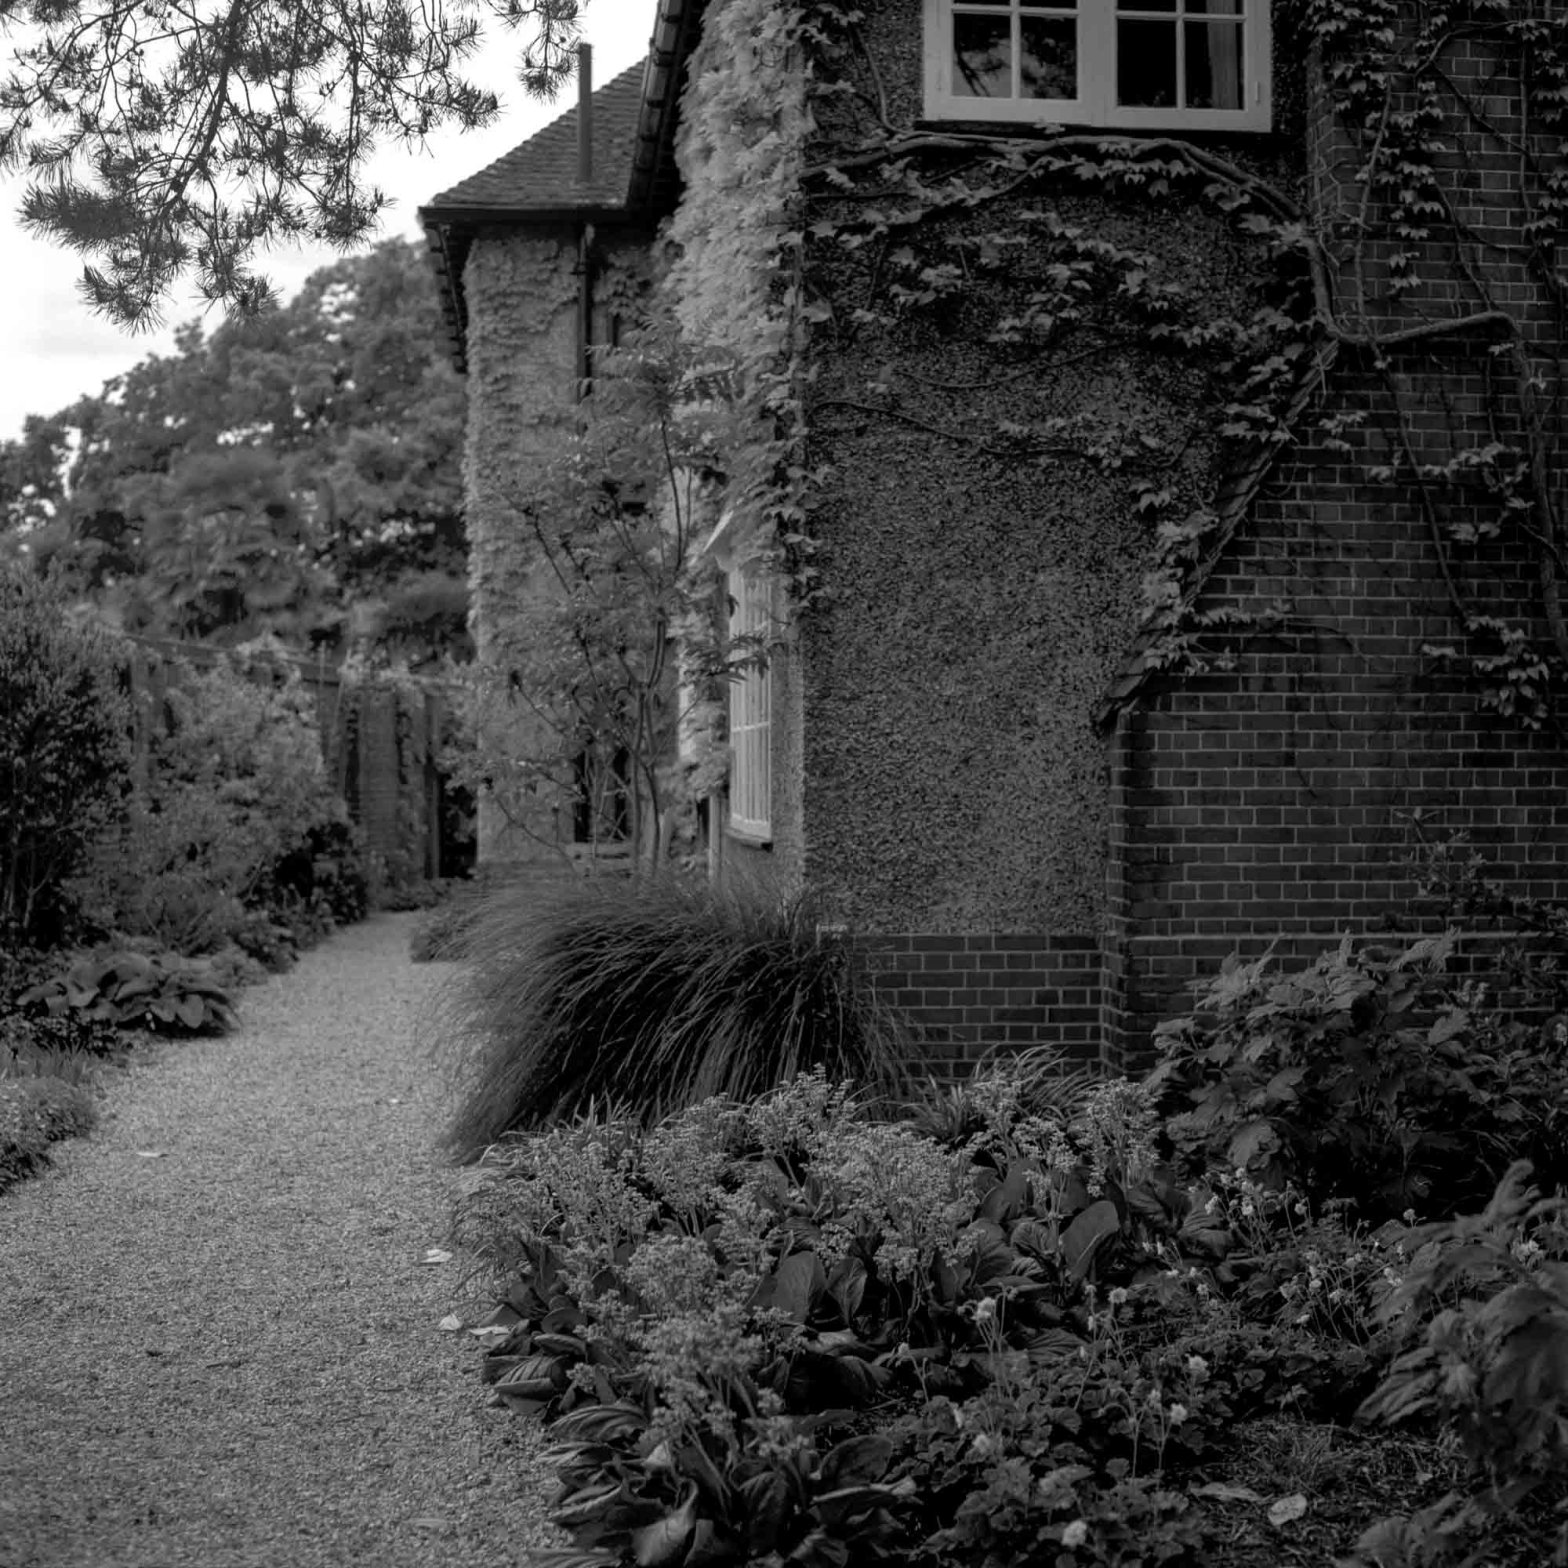 Photography: Side entrance #02 – Shot on Fuji NEOPAN 100 ACROS at EI 200 (120 format)